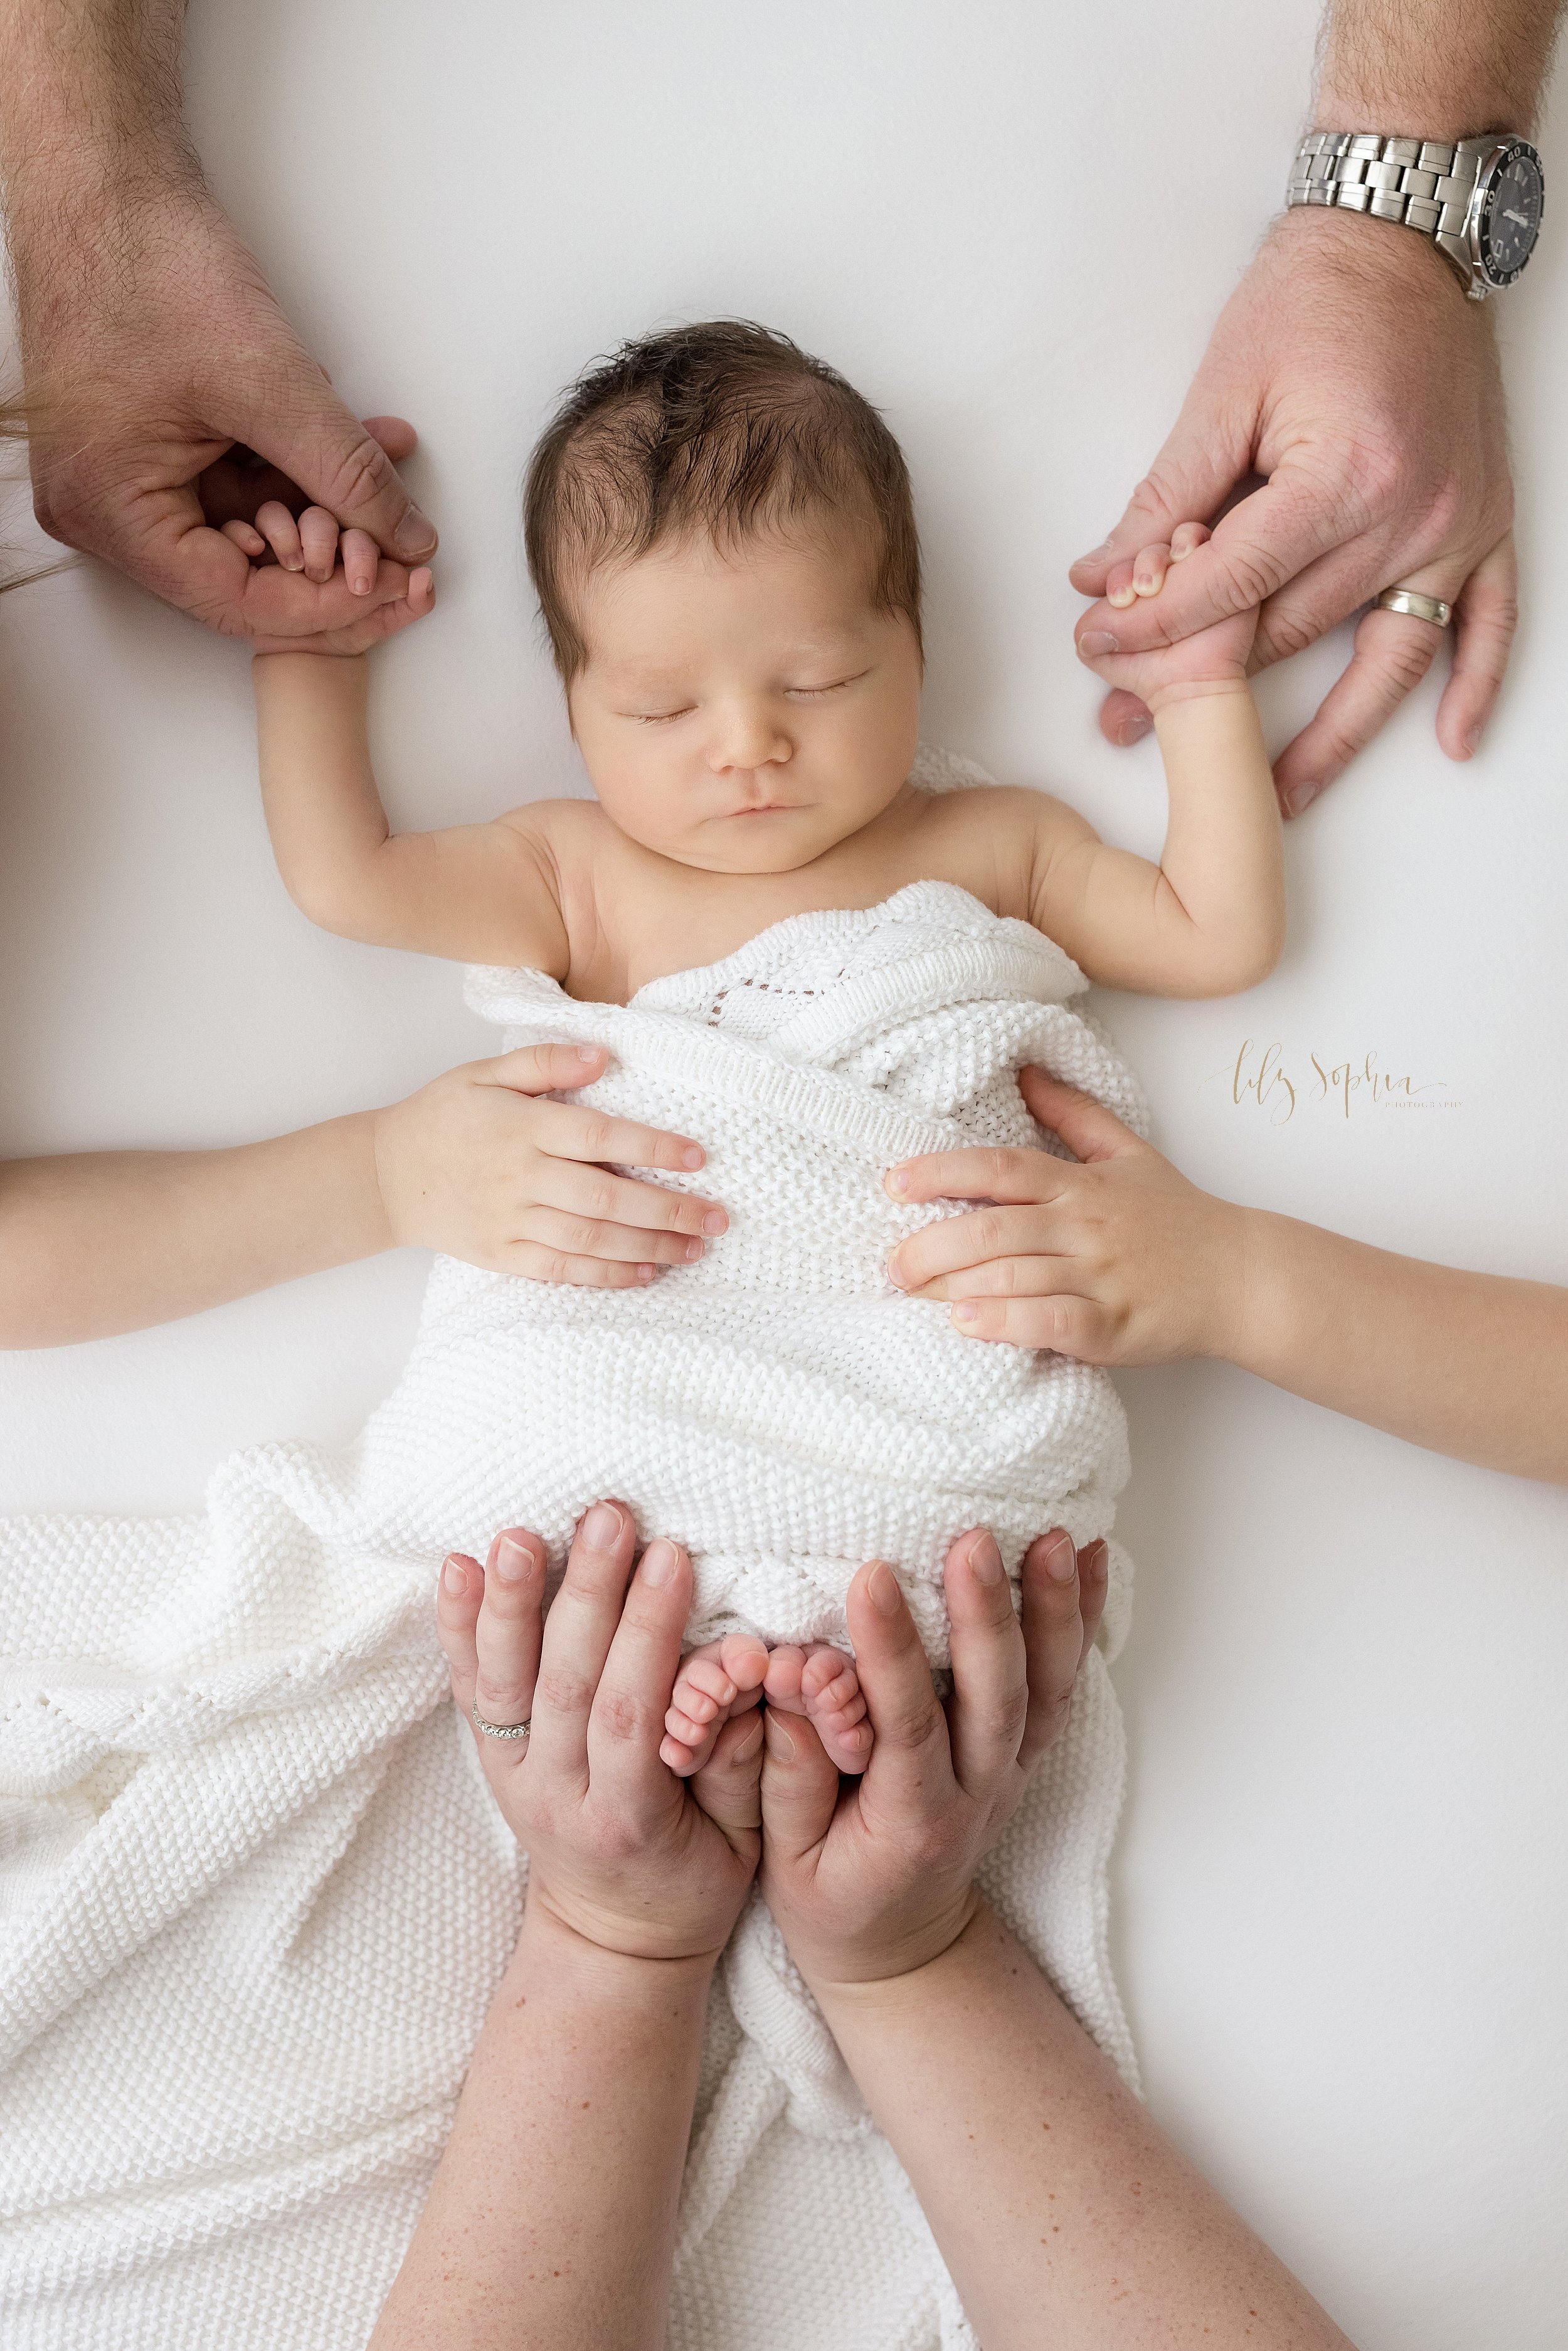  Family newborn photo of a sleeping newborn baby boy with his hands above his head to hold his father’s index fingers, his tiny feet sticking out of the soft white crocheted blanket snuggling him as his mom hold his feet and his siblings lay their ha